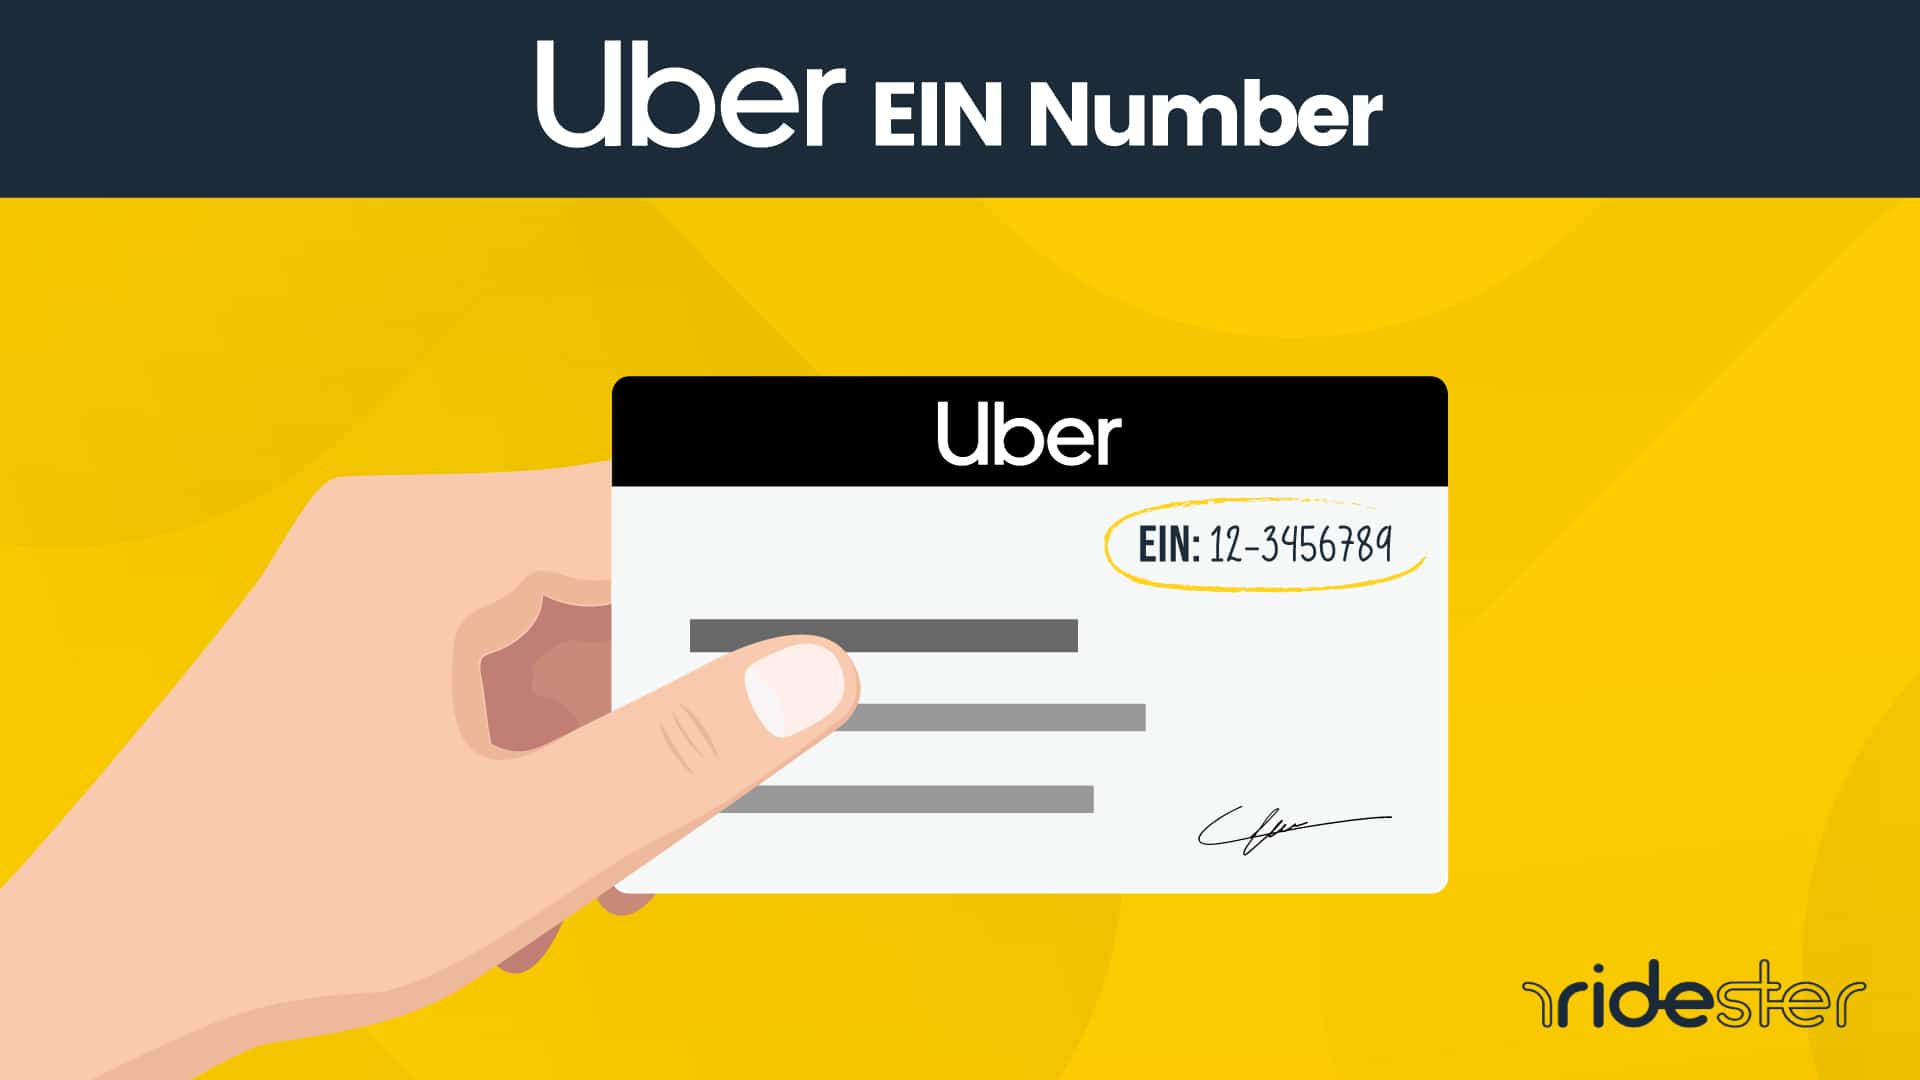 vector graphic showing a card that displays the uber ein number on it with a hand holding the card